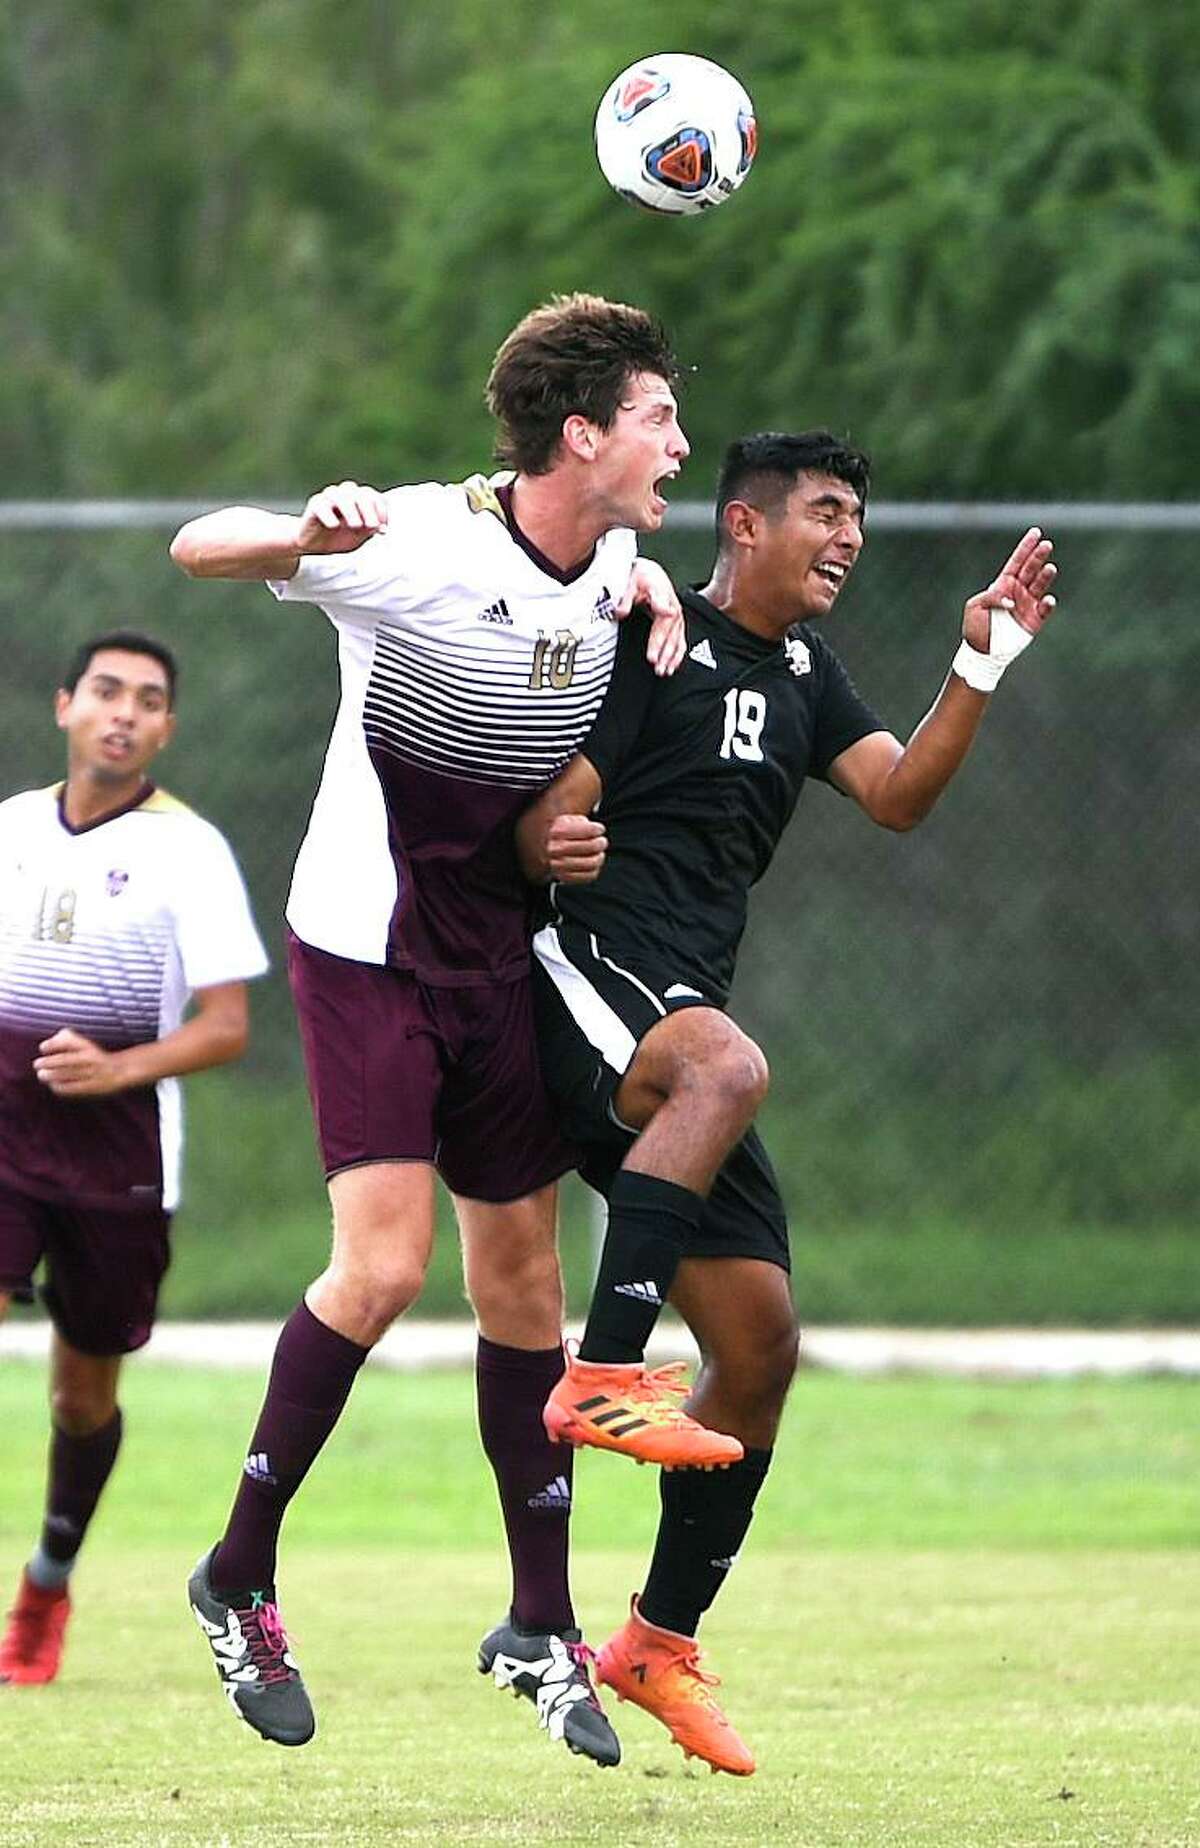 TAMIU’s athletic programs are joining the 19-team Lone Star Conference this season. The Dustdevils men’s soccer team has played many of its new league foes before in an expanded Heartland Conference field over recent years.